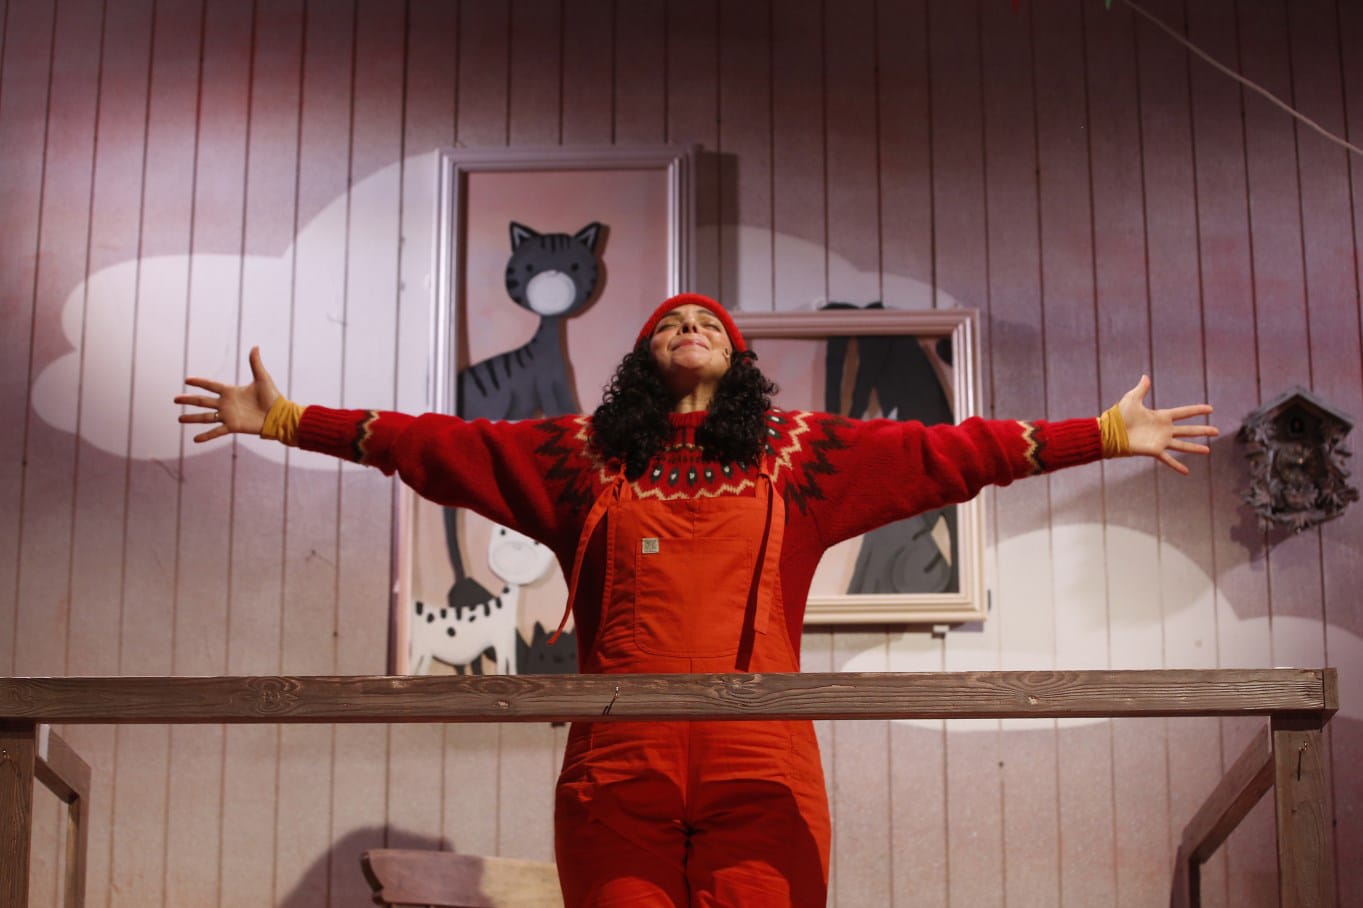 A woman in a red jumpsuit stretches in front of a picture of a cat